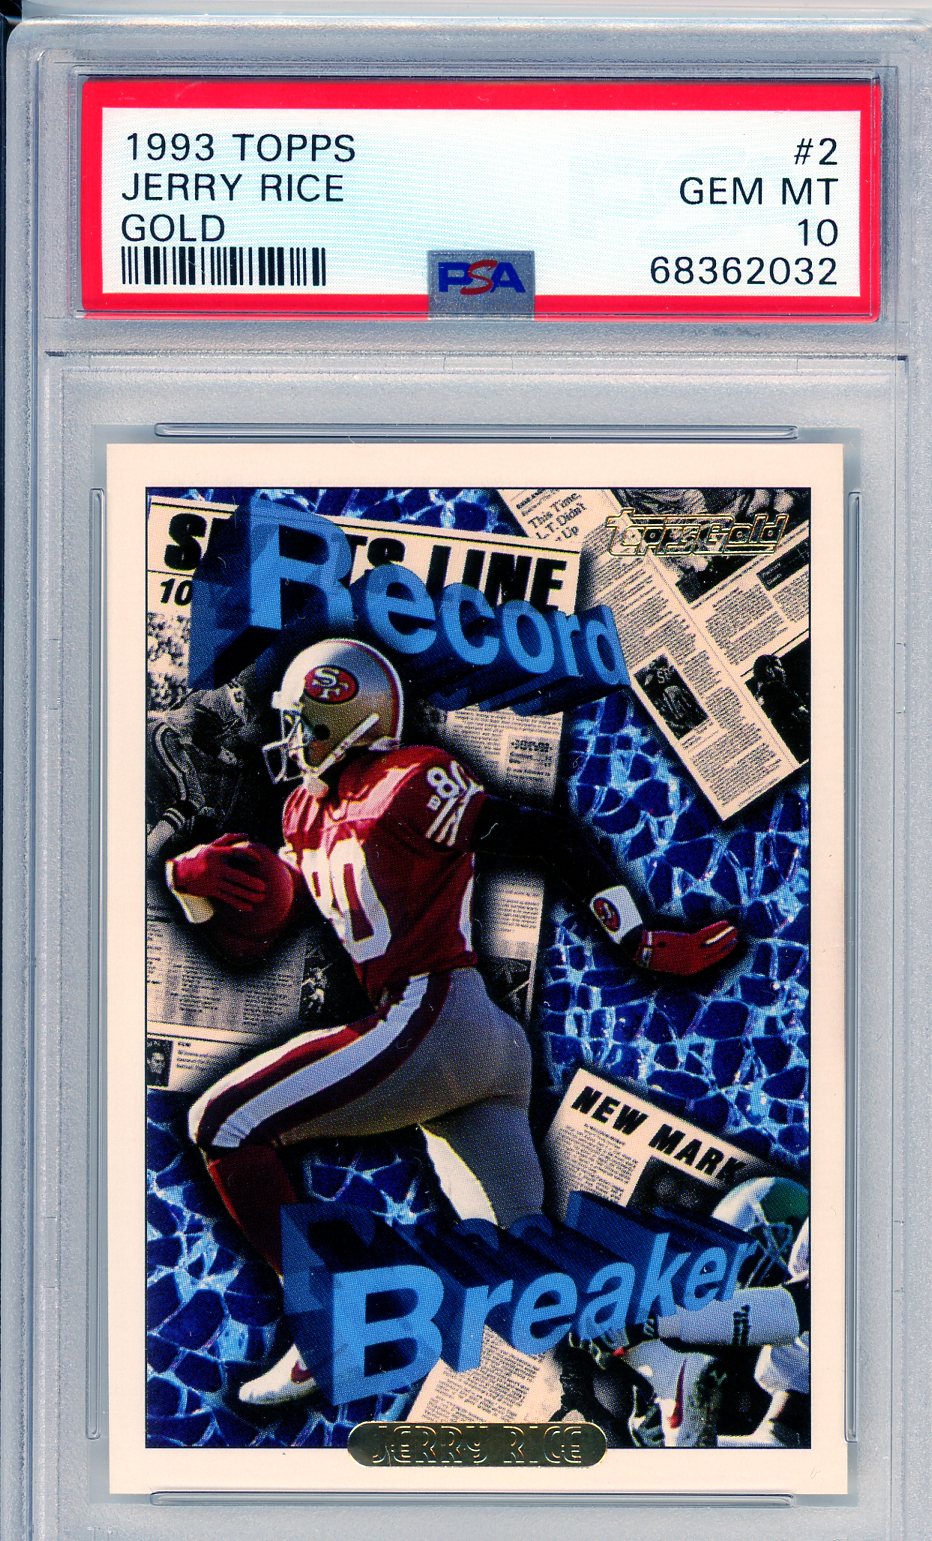 1993 Topps Jerry Rice Gold #2 Graded Card PSA 10